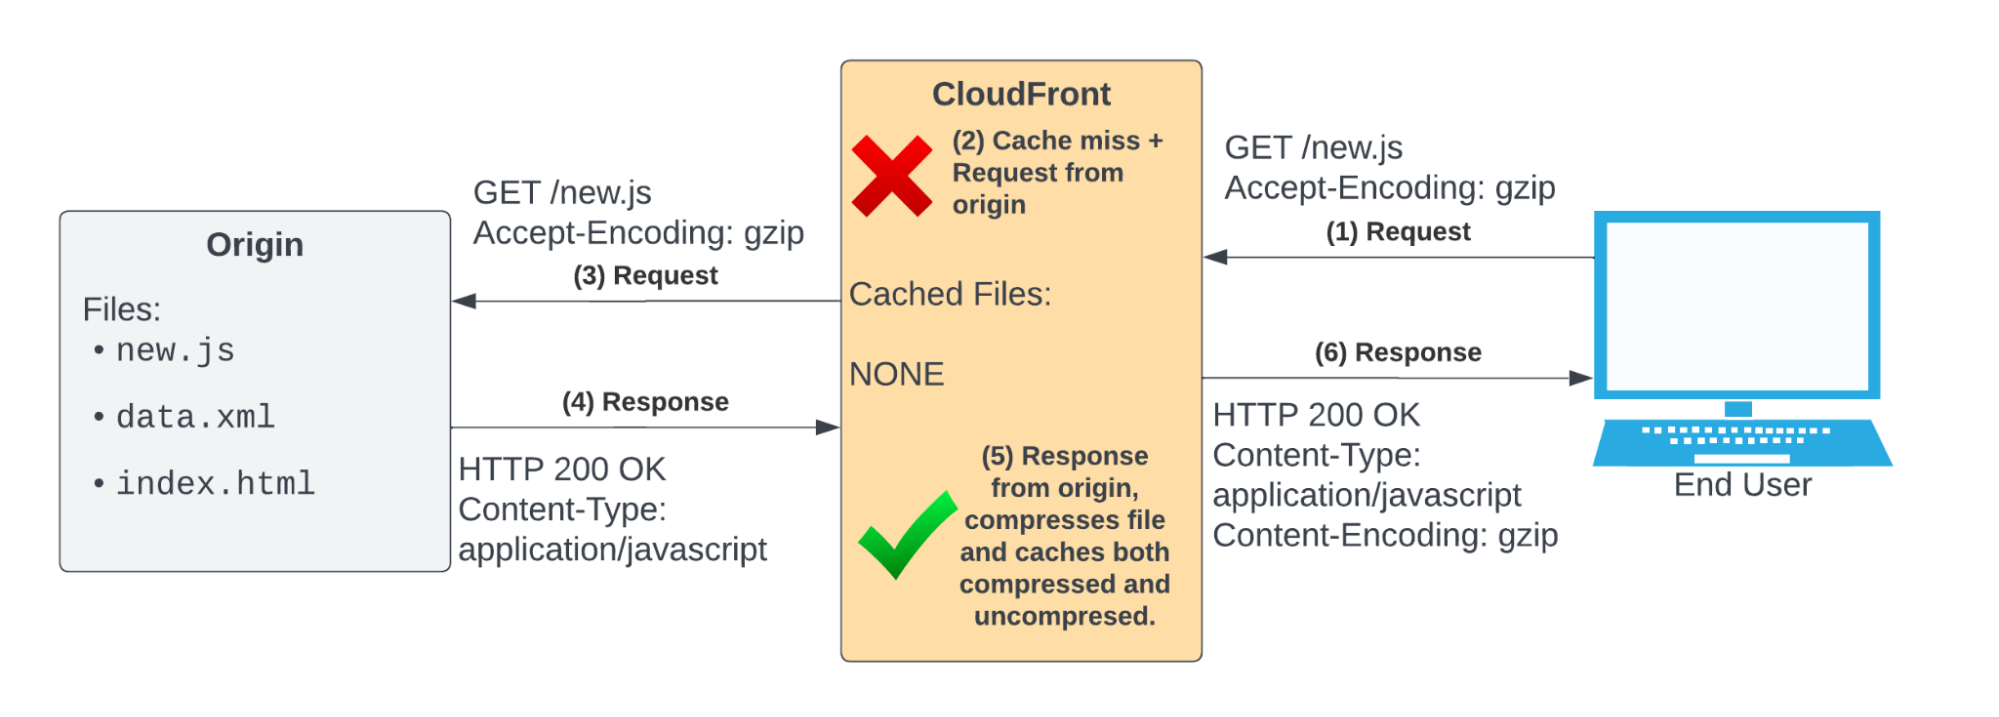 CloudFront cache miss